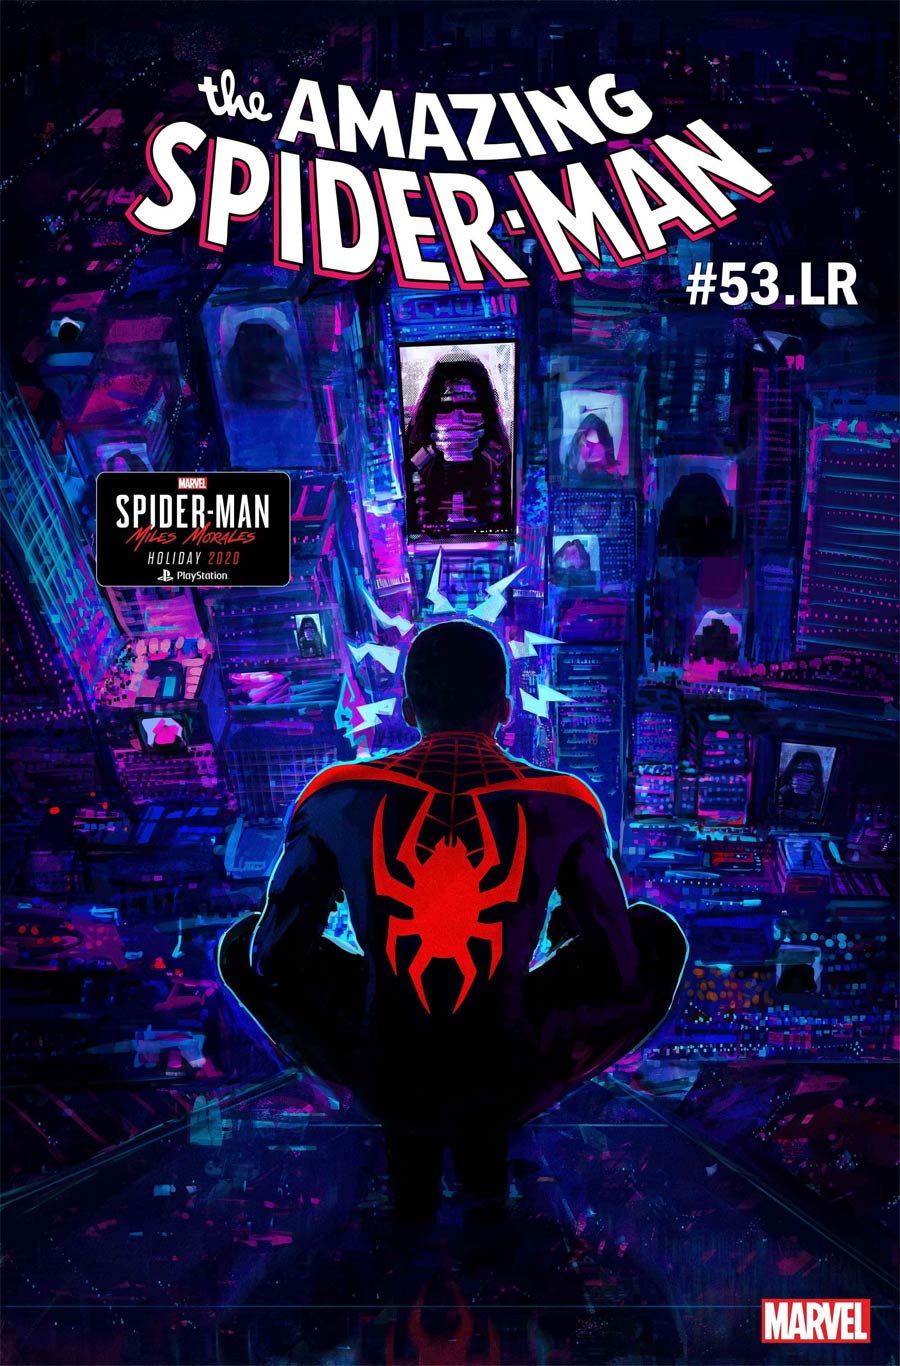 Amazing Spider-Man Vol 5 #53 LR Cover C Incentive Jason Hickey Marvels Spider-Man Miles Morales Variant Cover